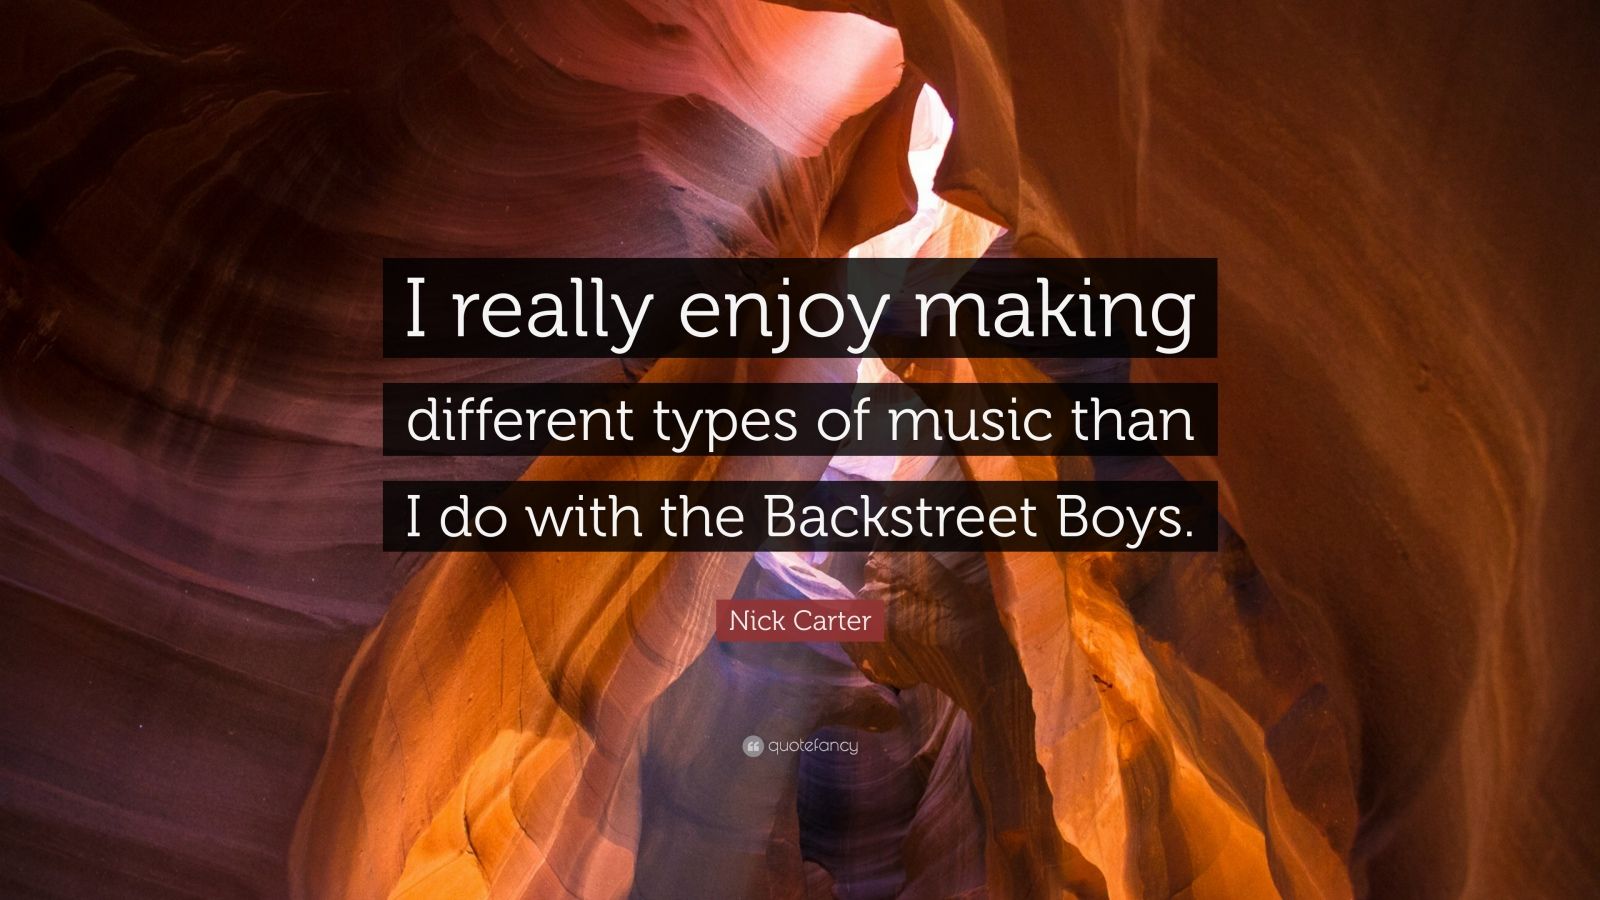 4 Nick Carter Quotes About Backstreet Boys